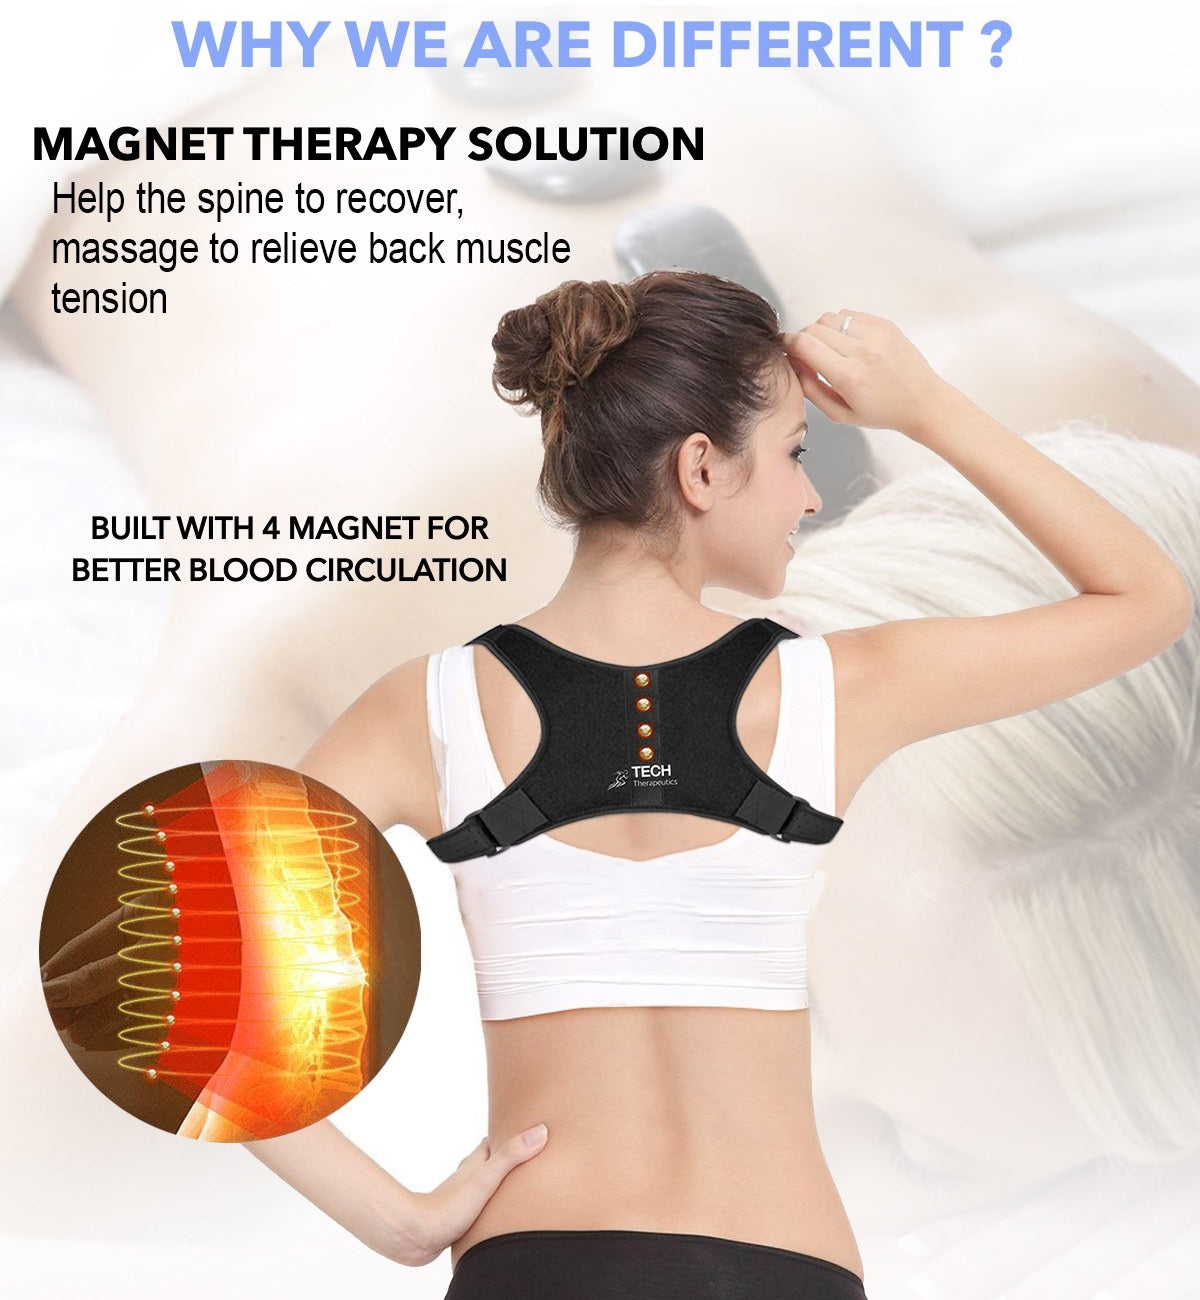 beatXP Posture Corrector - Therapy for Lower & Upper Pain Relief